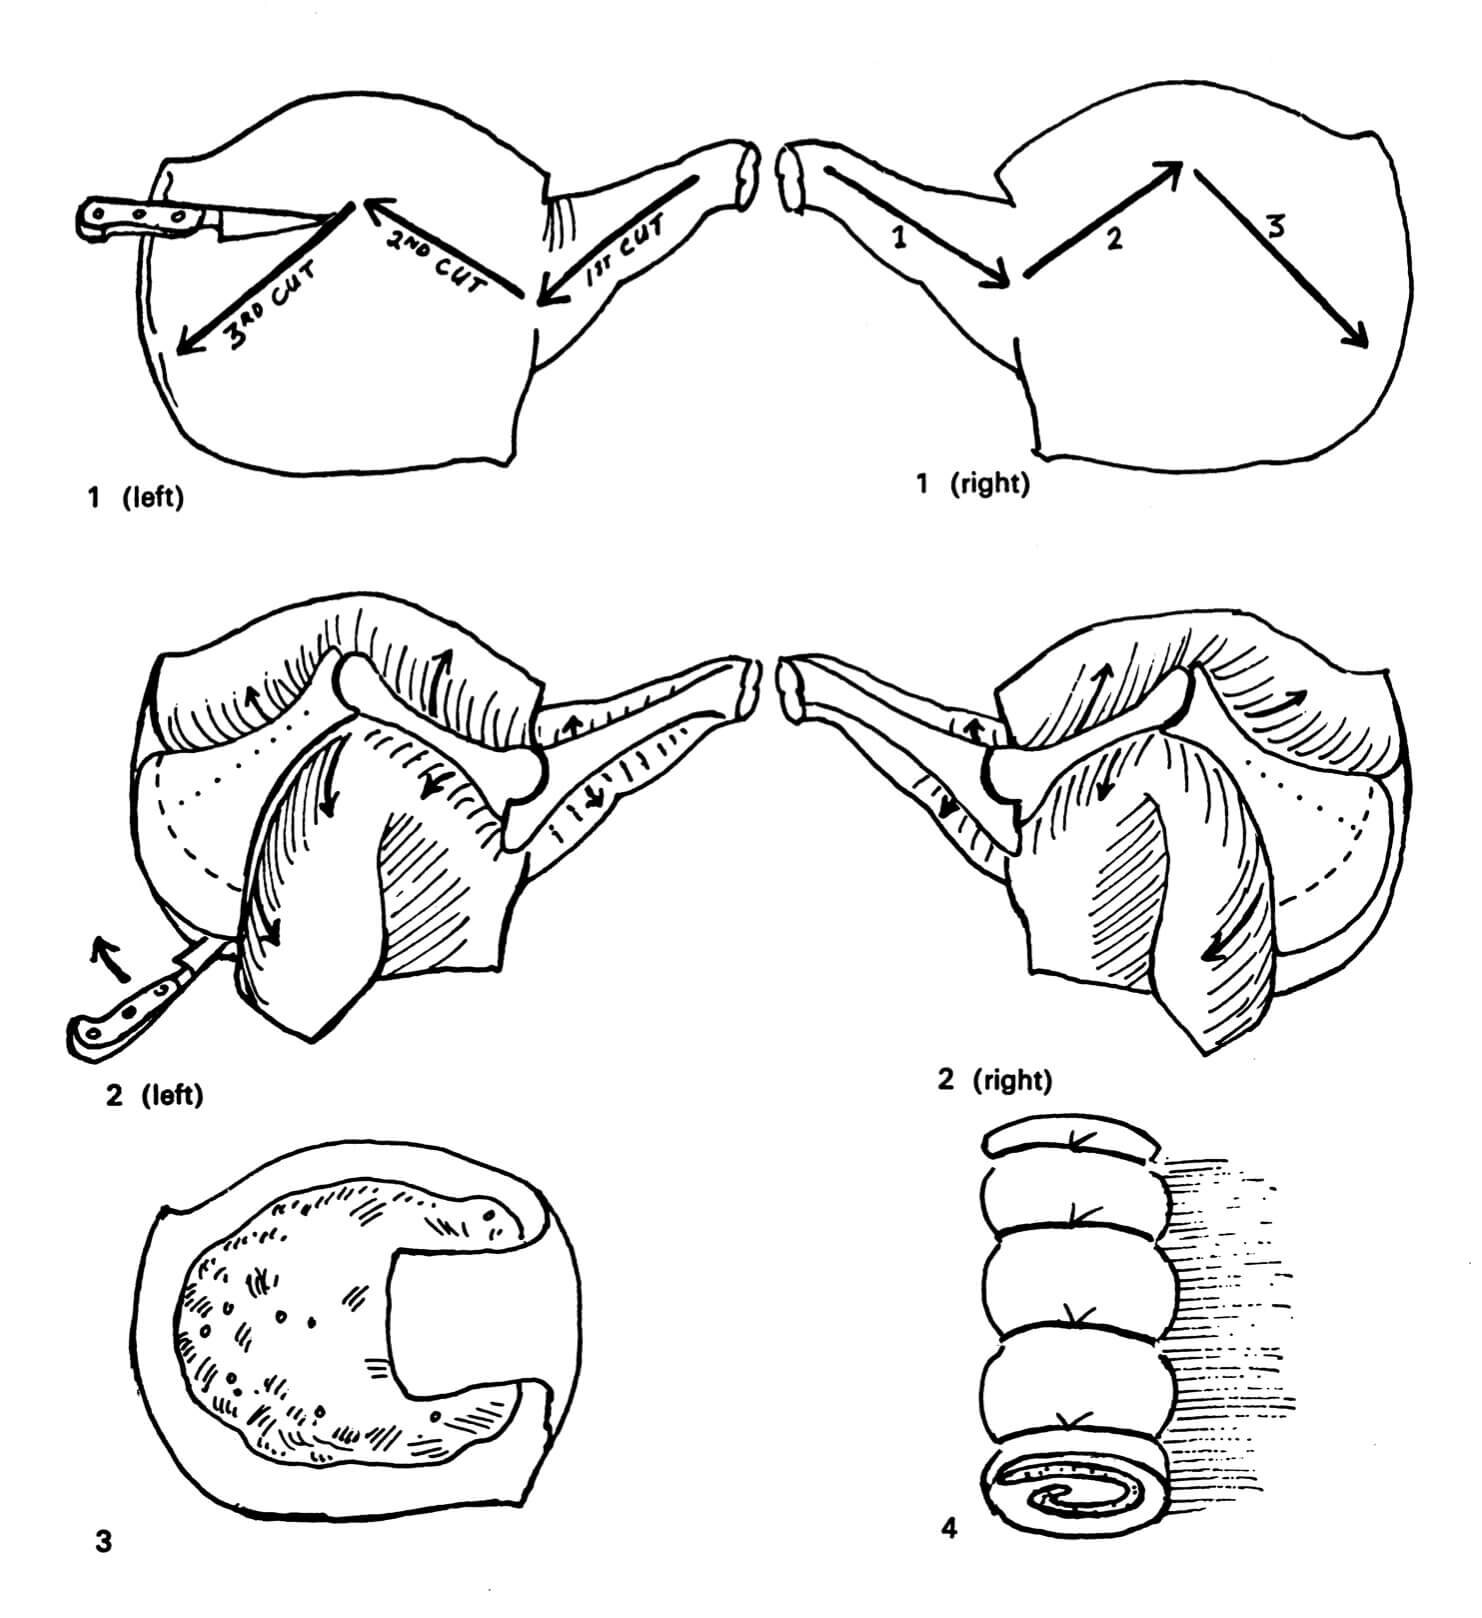 Illustrations show techniques such as how to bone a shoulder of lamb or veal